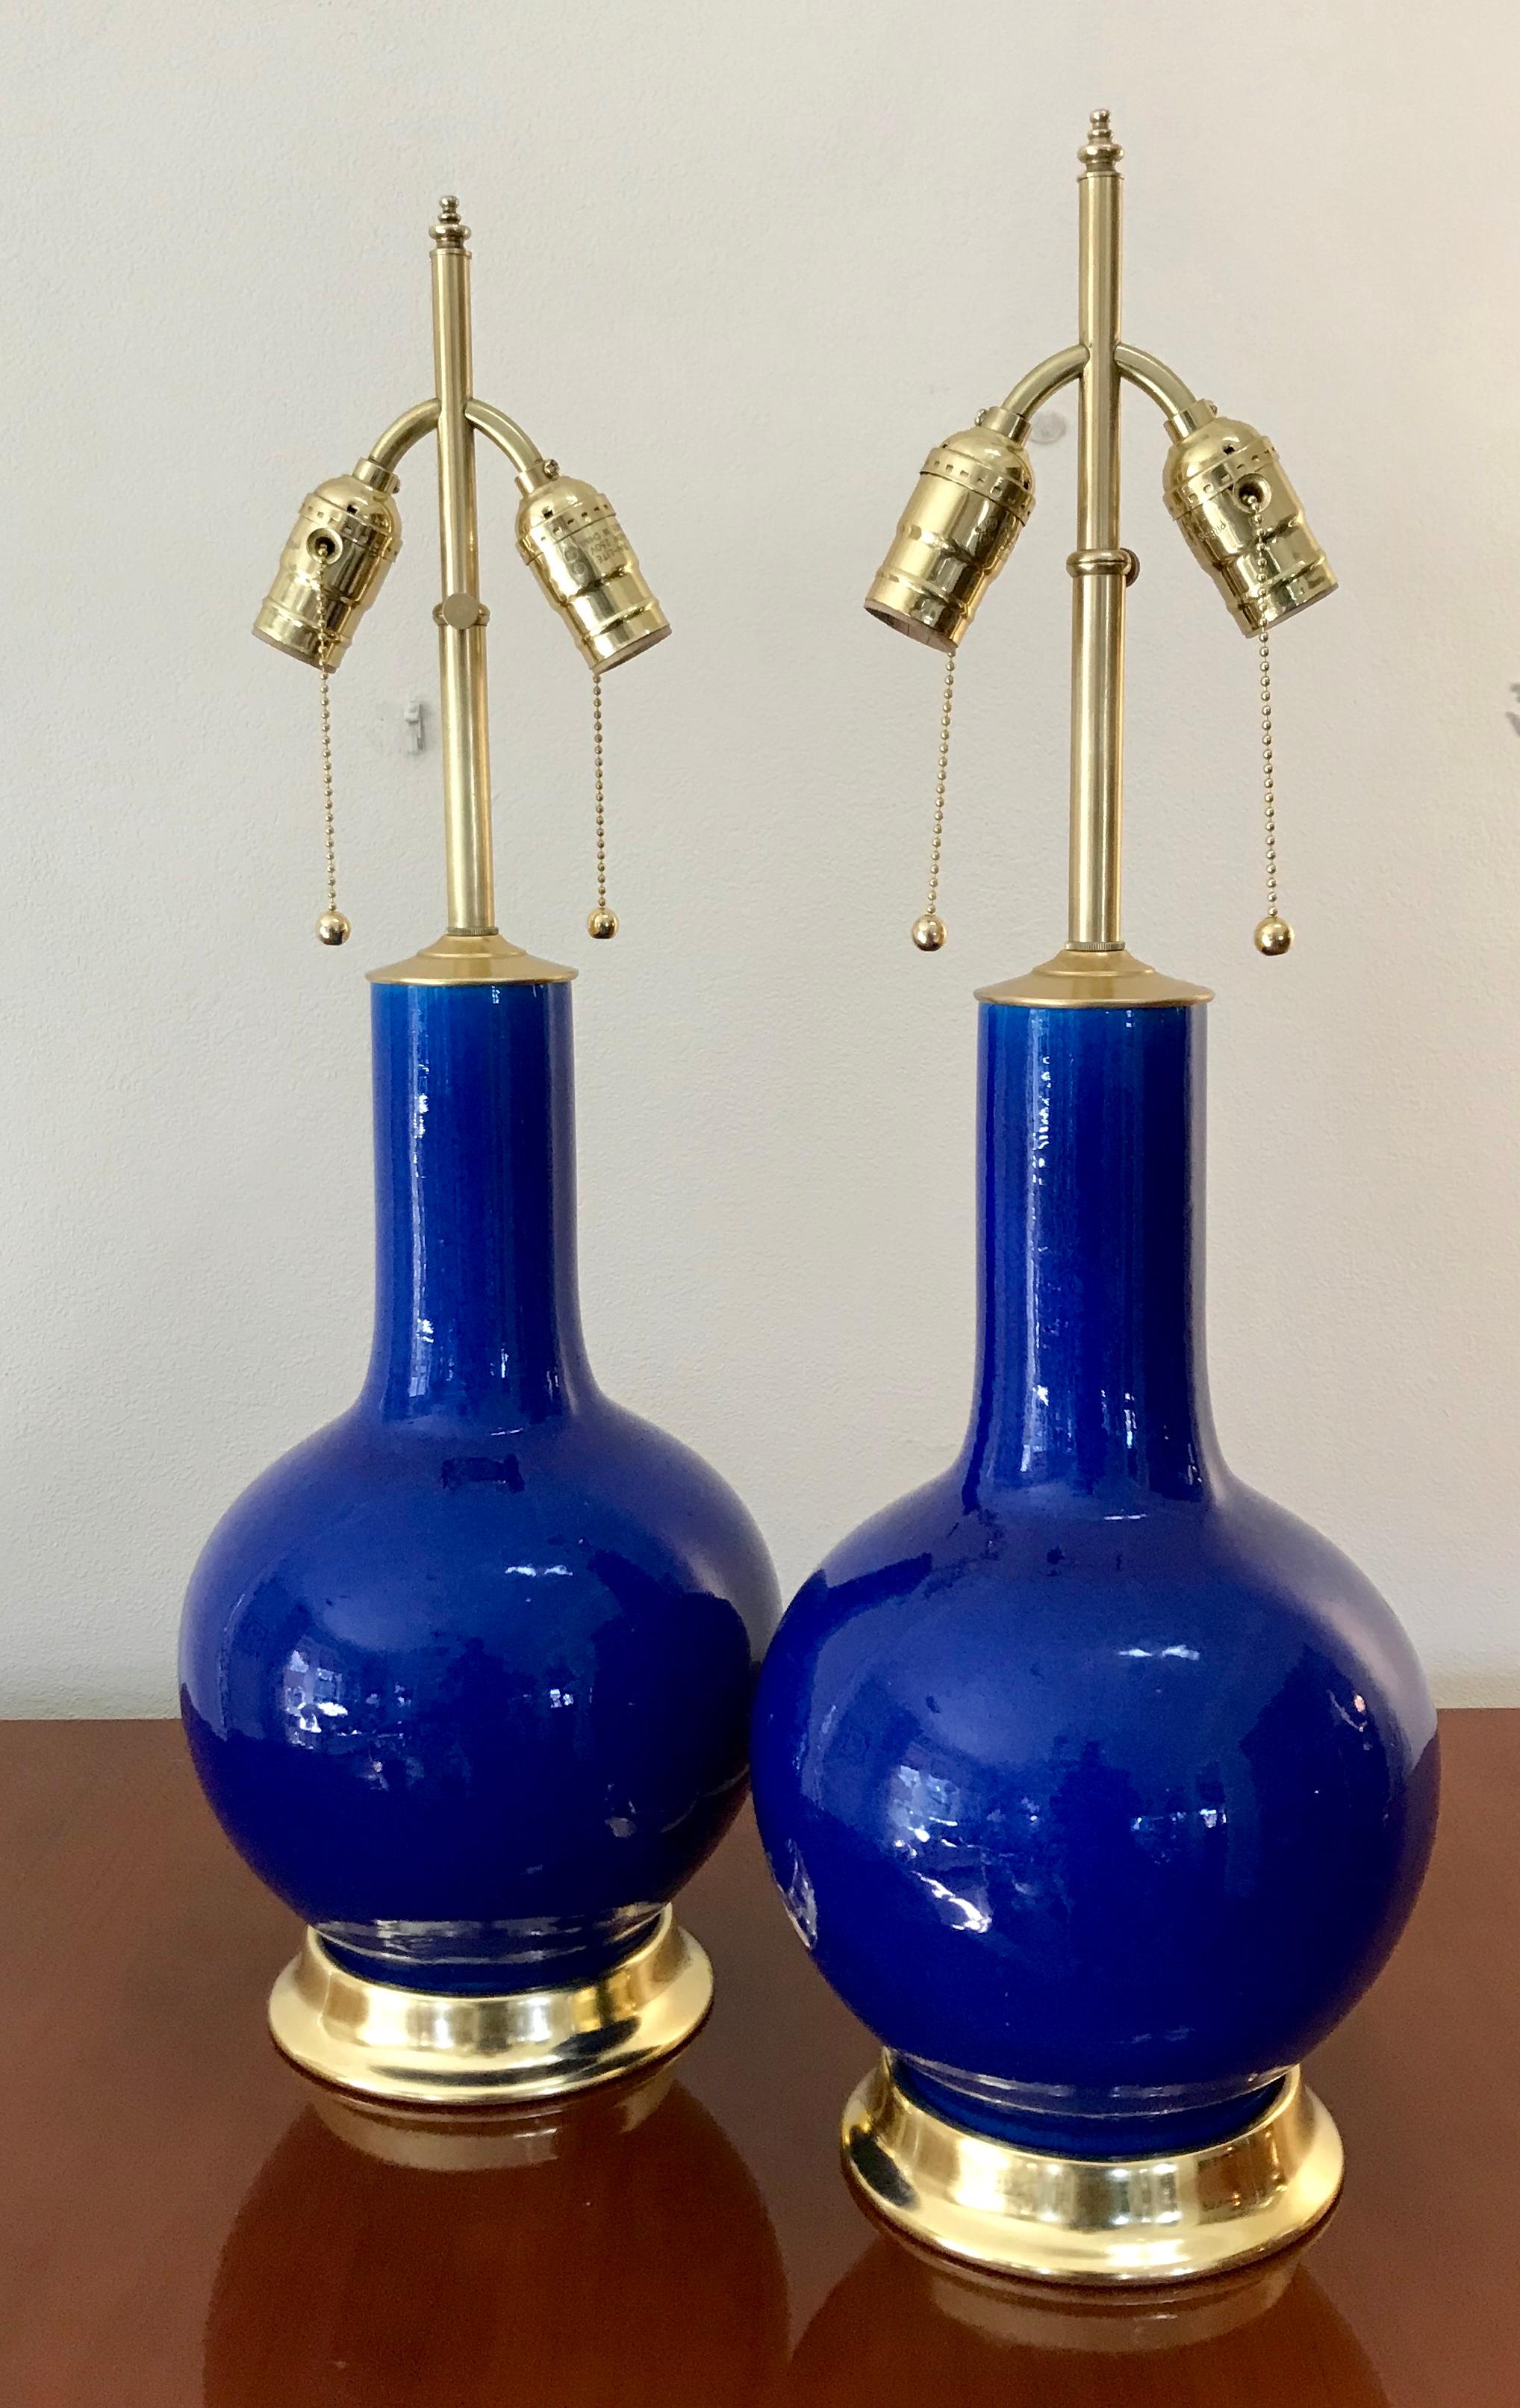 Pair of Chinese export globular or single gourd form porcelain vases converted to lamps mounted on custom wood turned bases in a 23 karat double water gilt finish. The eye catching blue color is very vibrant and has a very reflective and glassy